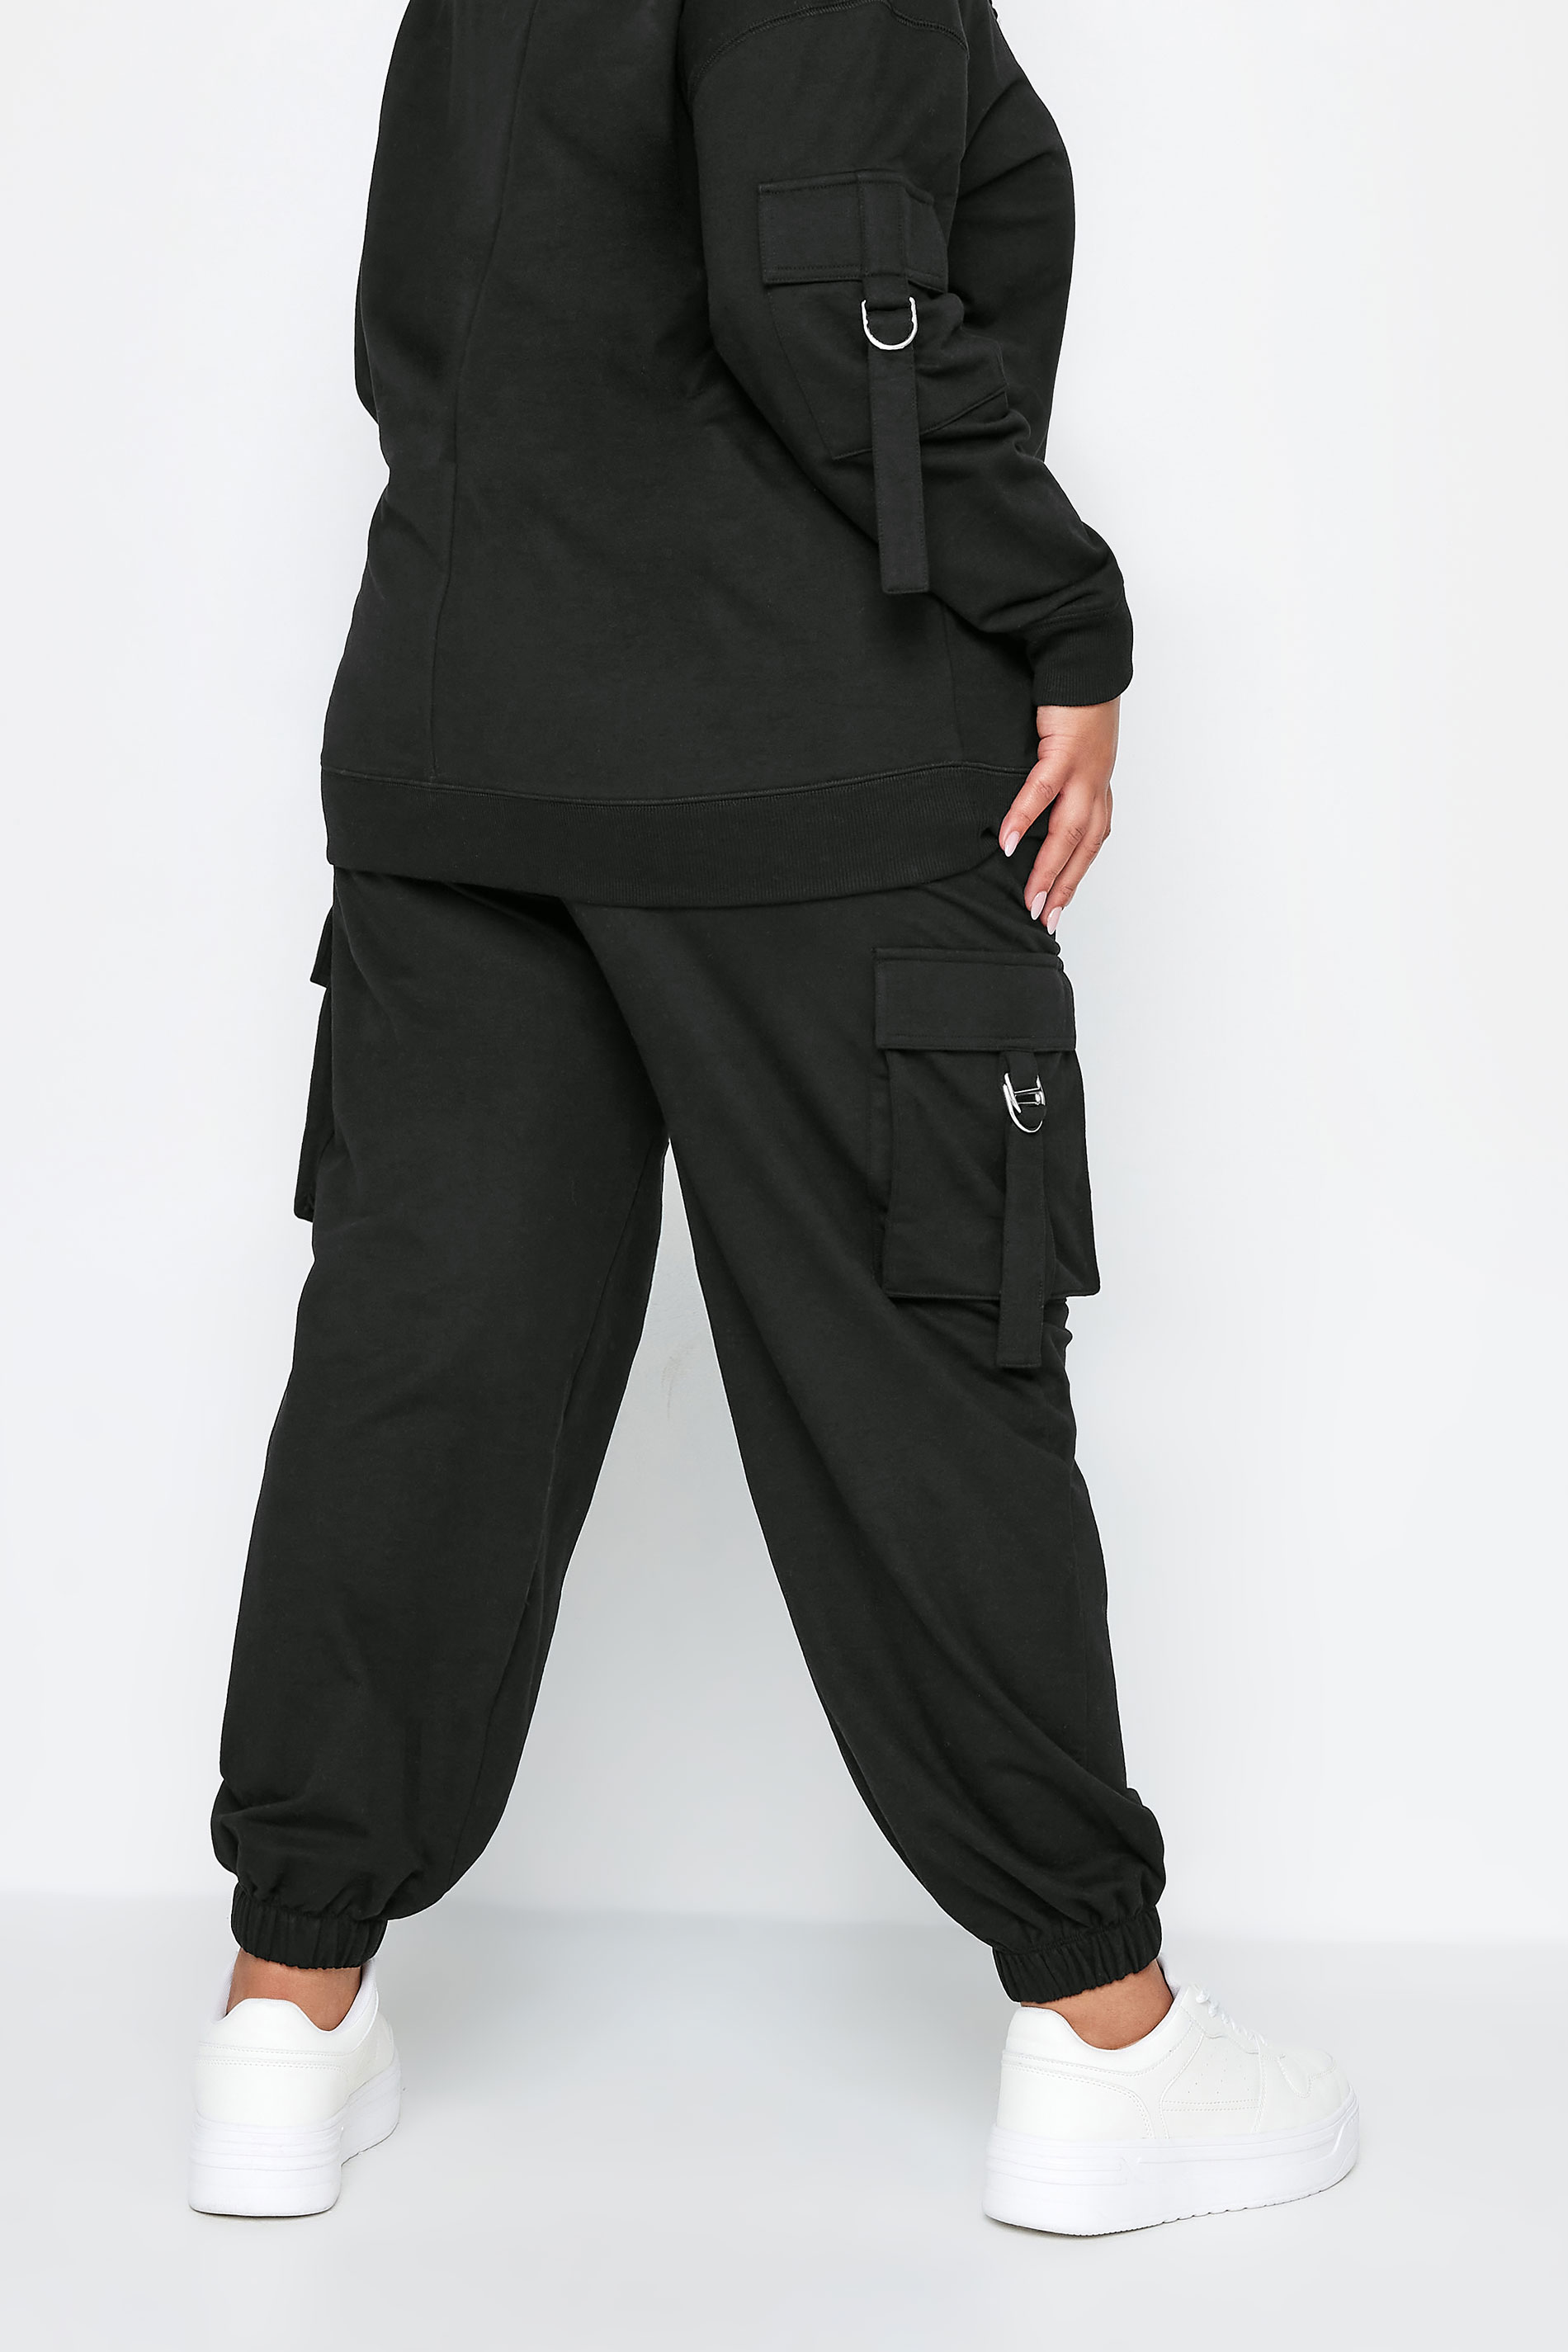 LIMITED COLLECTION Plus Size Black Cargo Joggers | Yours Clothing 3